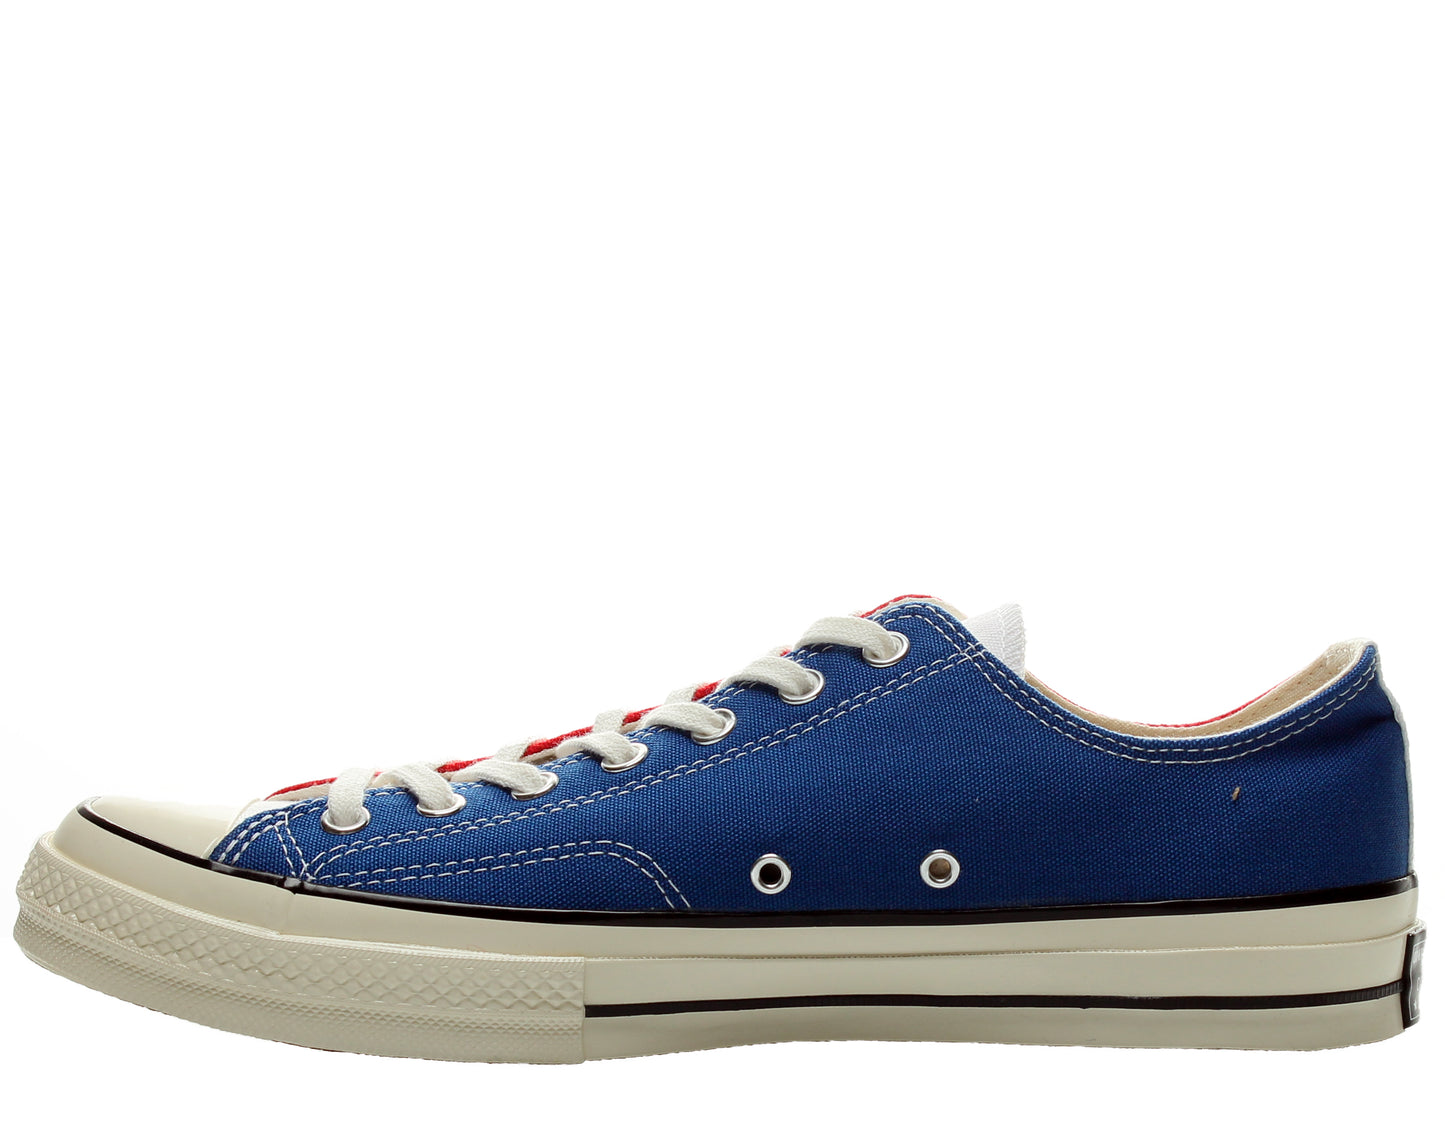 Converse Chuck Taylor All Star 3 Panel OX 1970 Low Top Sneakers